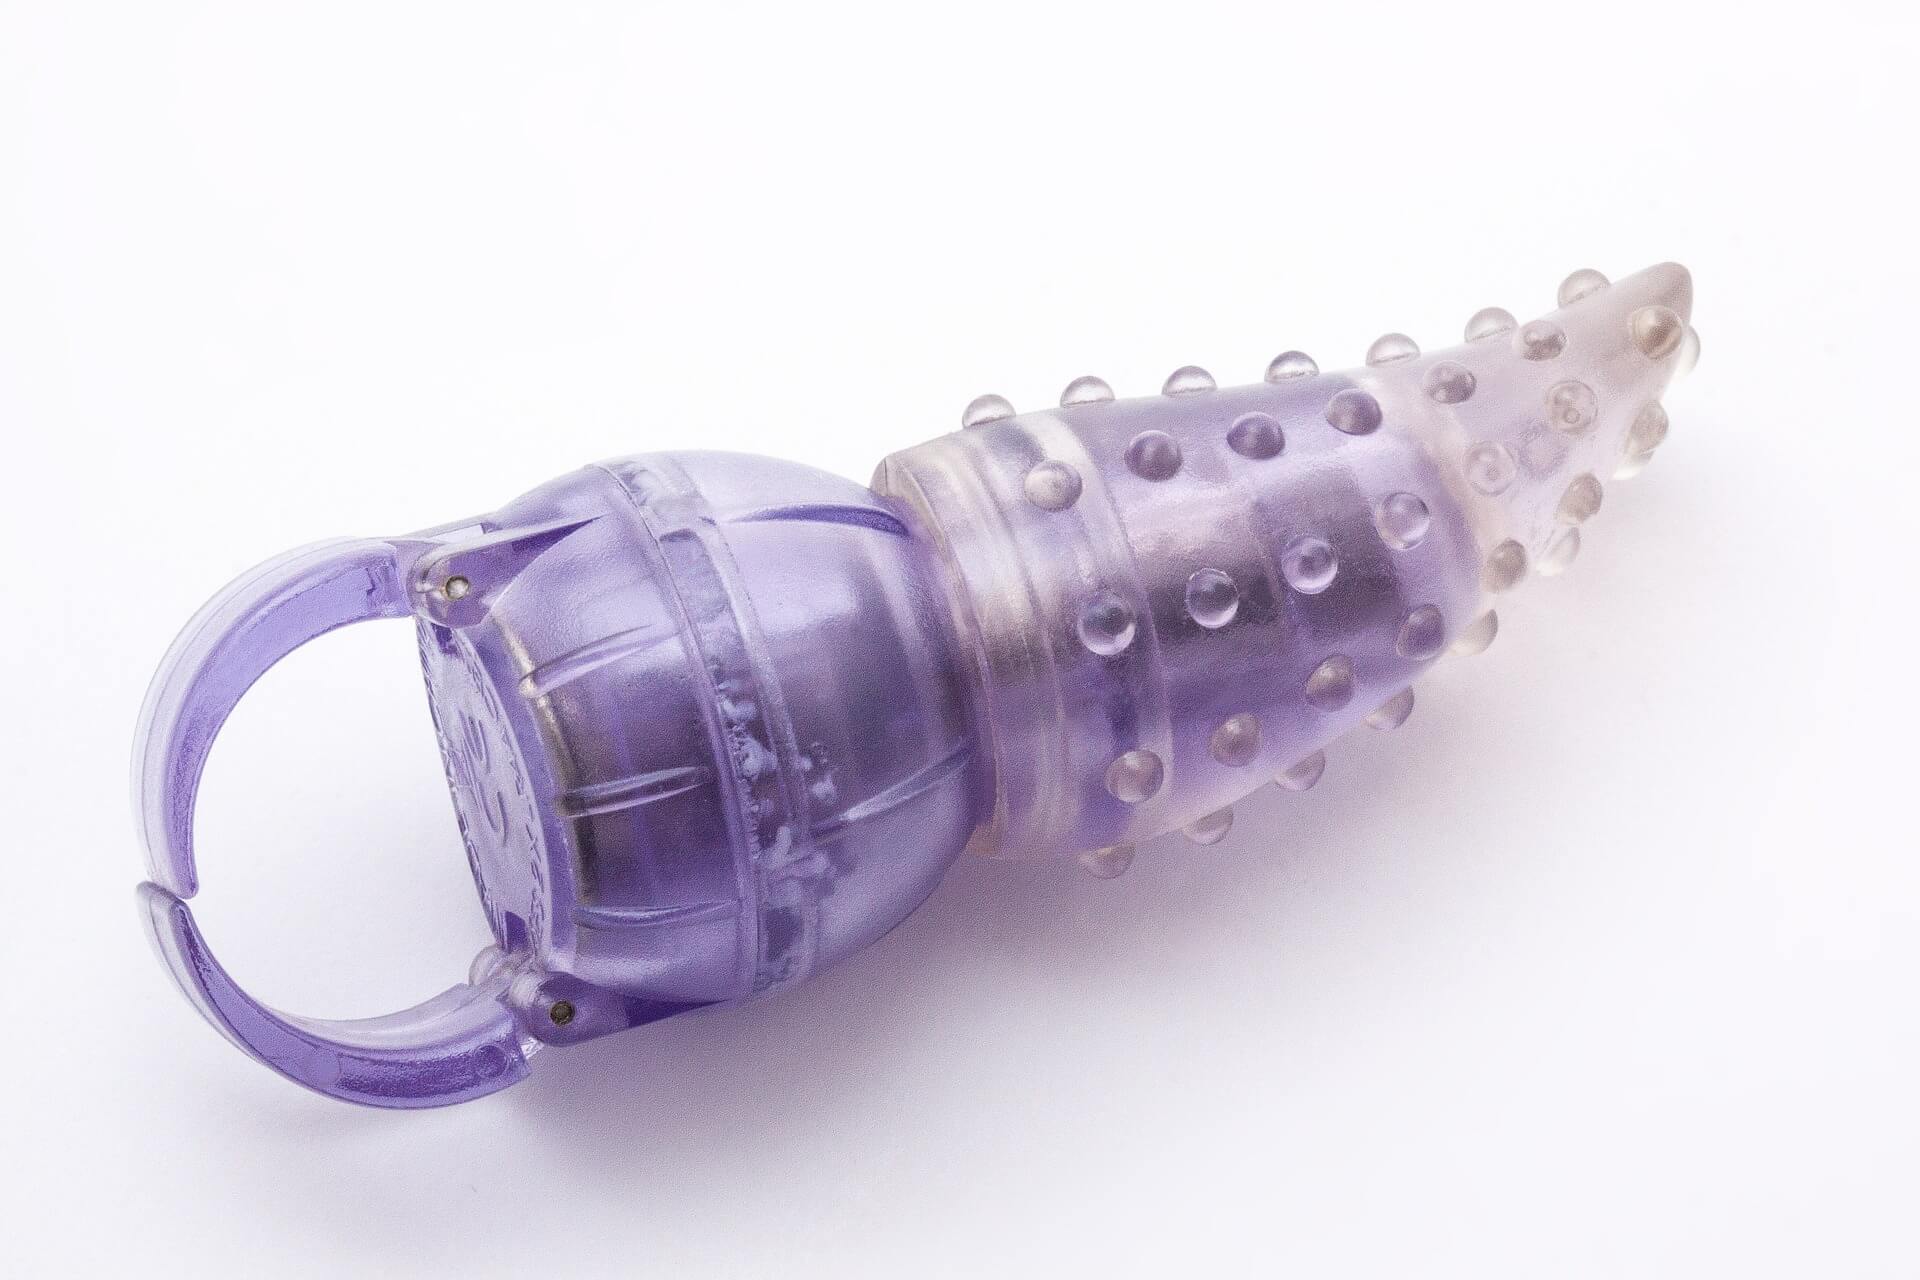 A purple sex toy with a loop and bumps.